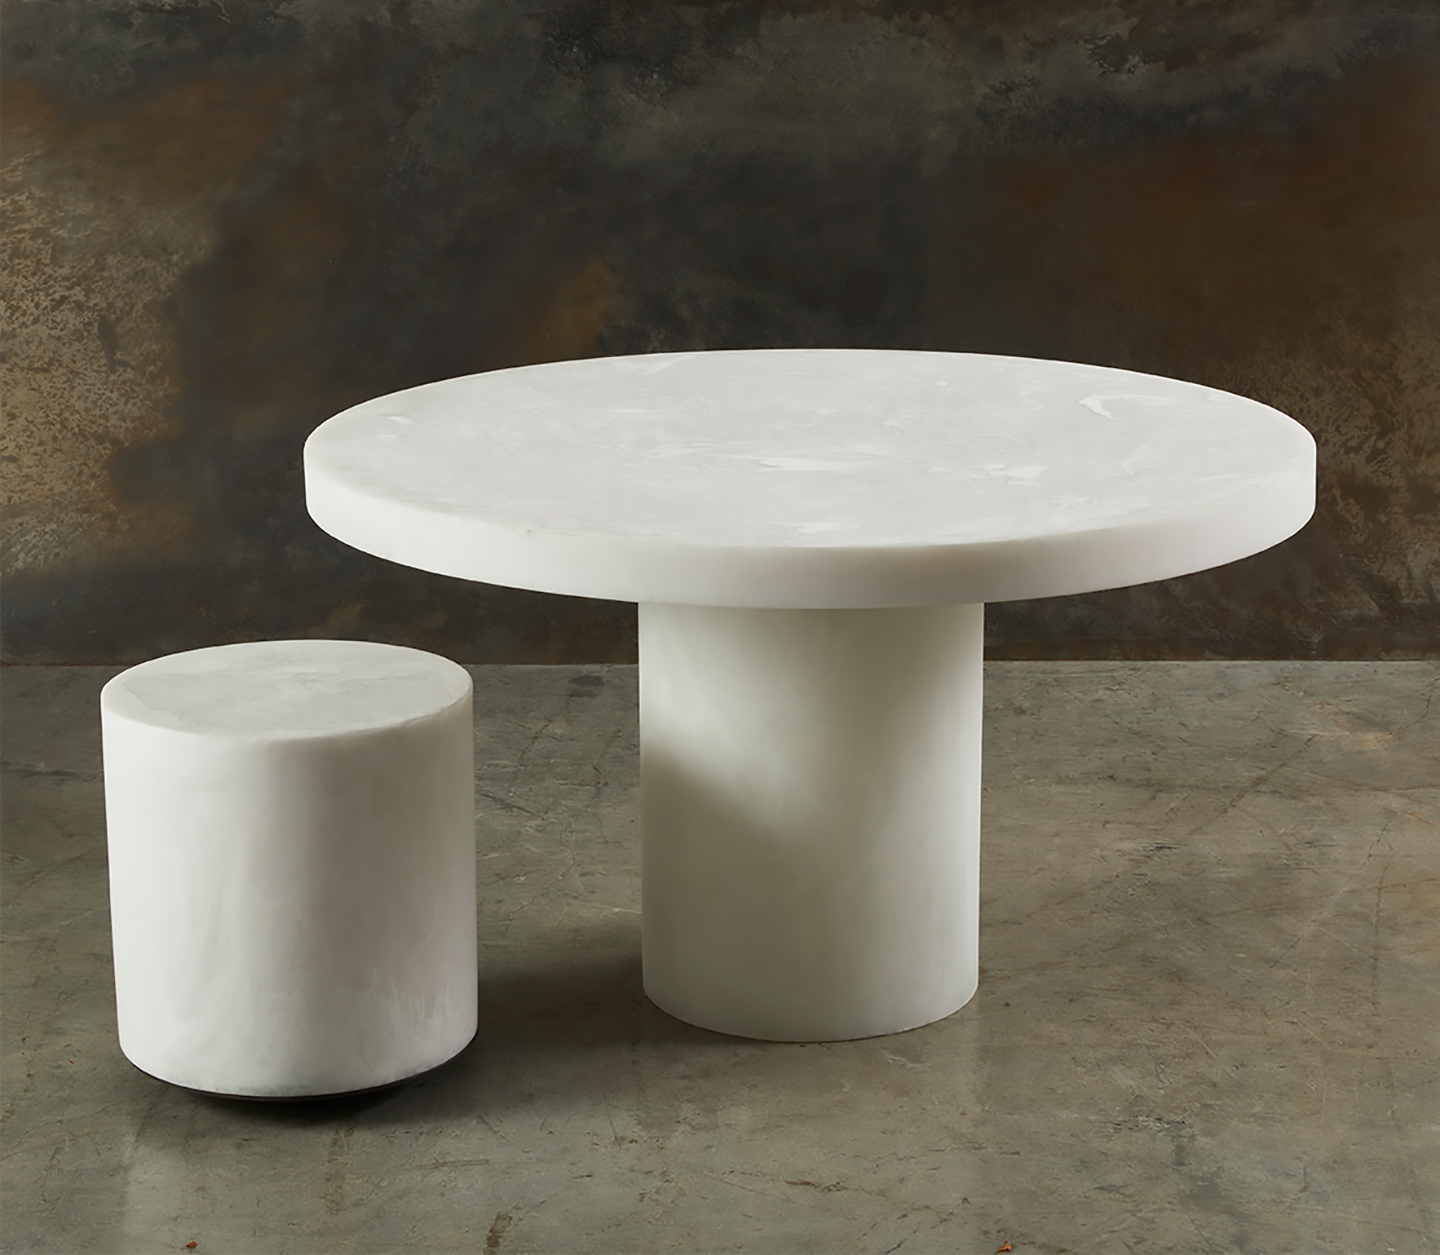 An intimate round resin dining table adds both class and simplicity and is a very popular furniture choice for interior designers. The height of this table can be customized to your preference. Available for sale at Studio Sturdy and created by Martha Sturdy